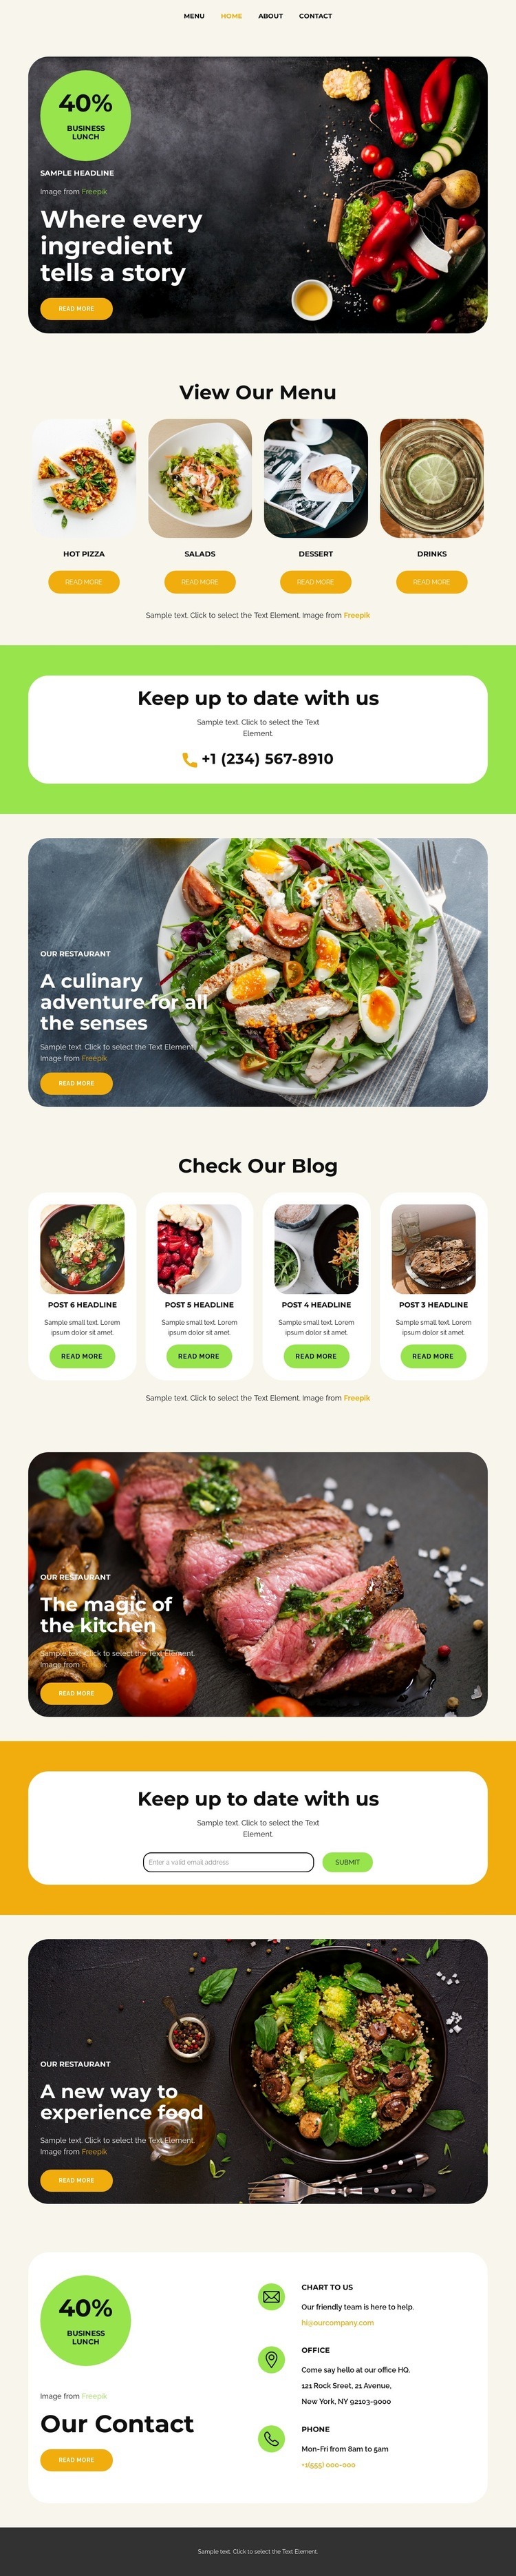 The magic of the kitchen Wix Template Alternative